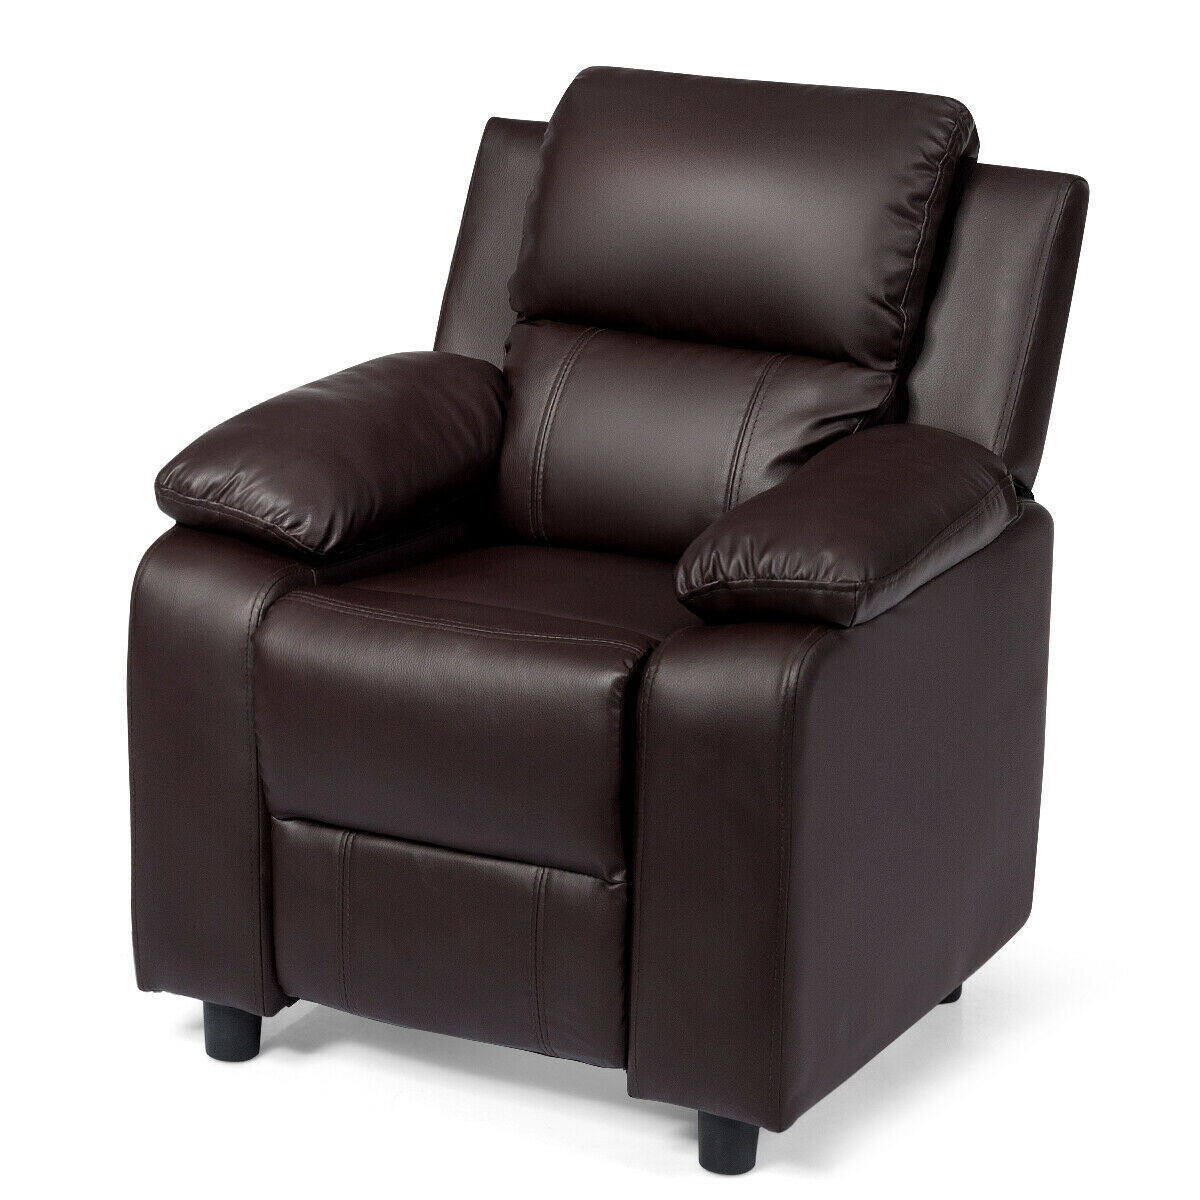 Deluxe Kids Armchair Recliner Headrest Sofa w/ Storage Arms-Brown - Color: Brown